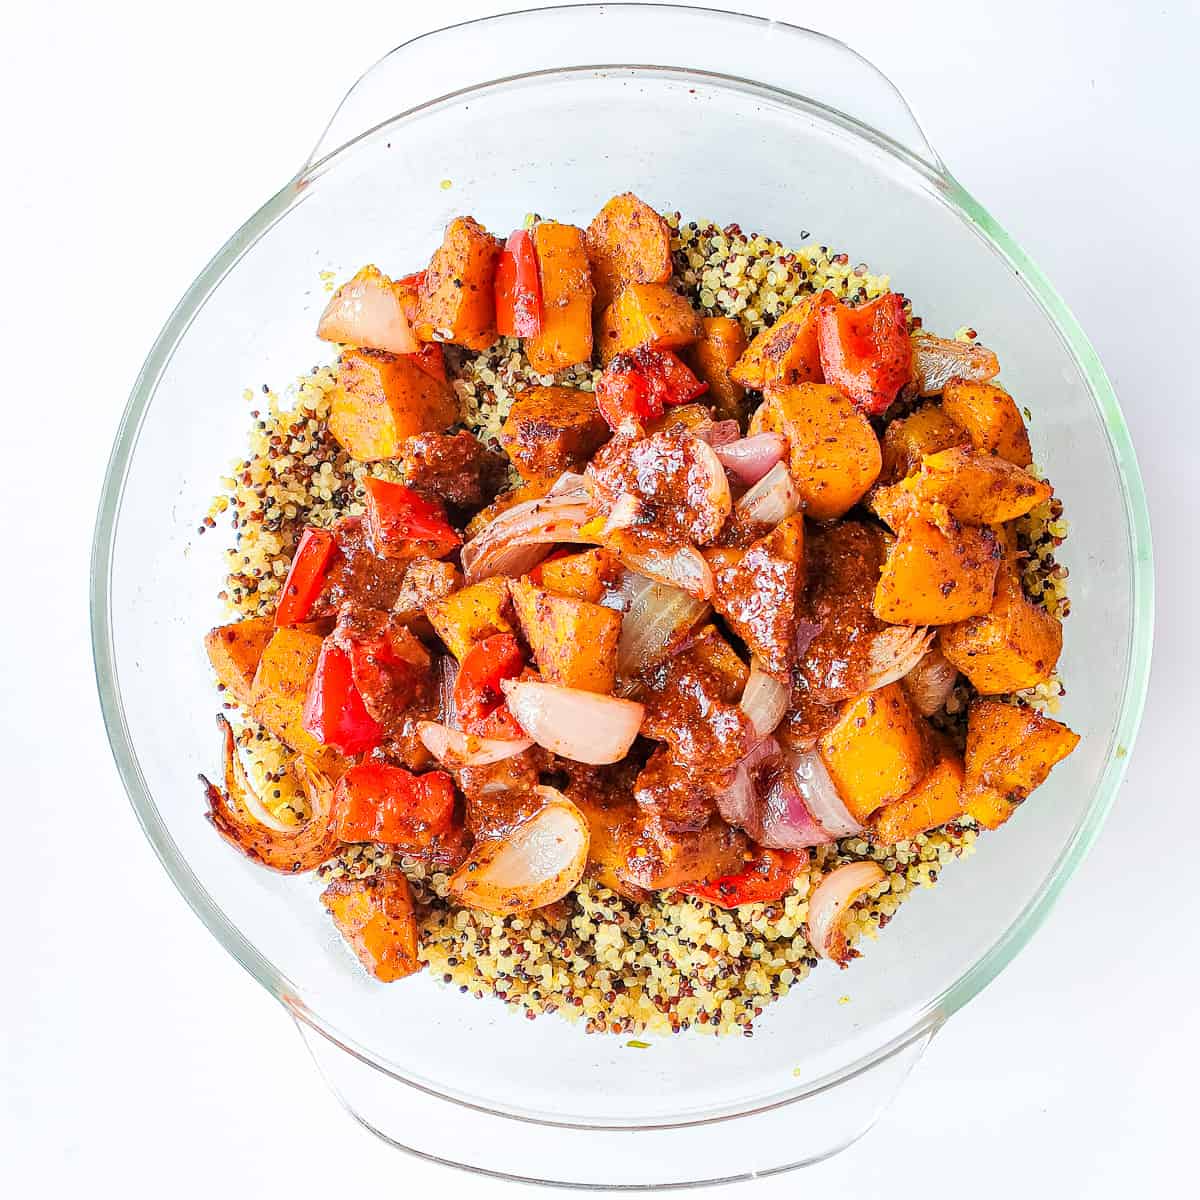 Honey lemon dressing drizzled on quinoa and roasted vegetables in a glass bowl.